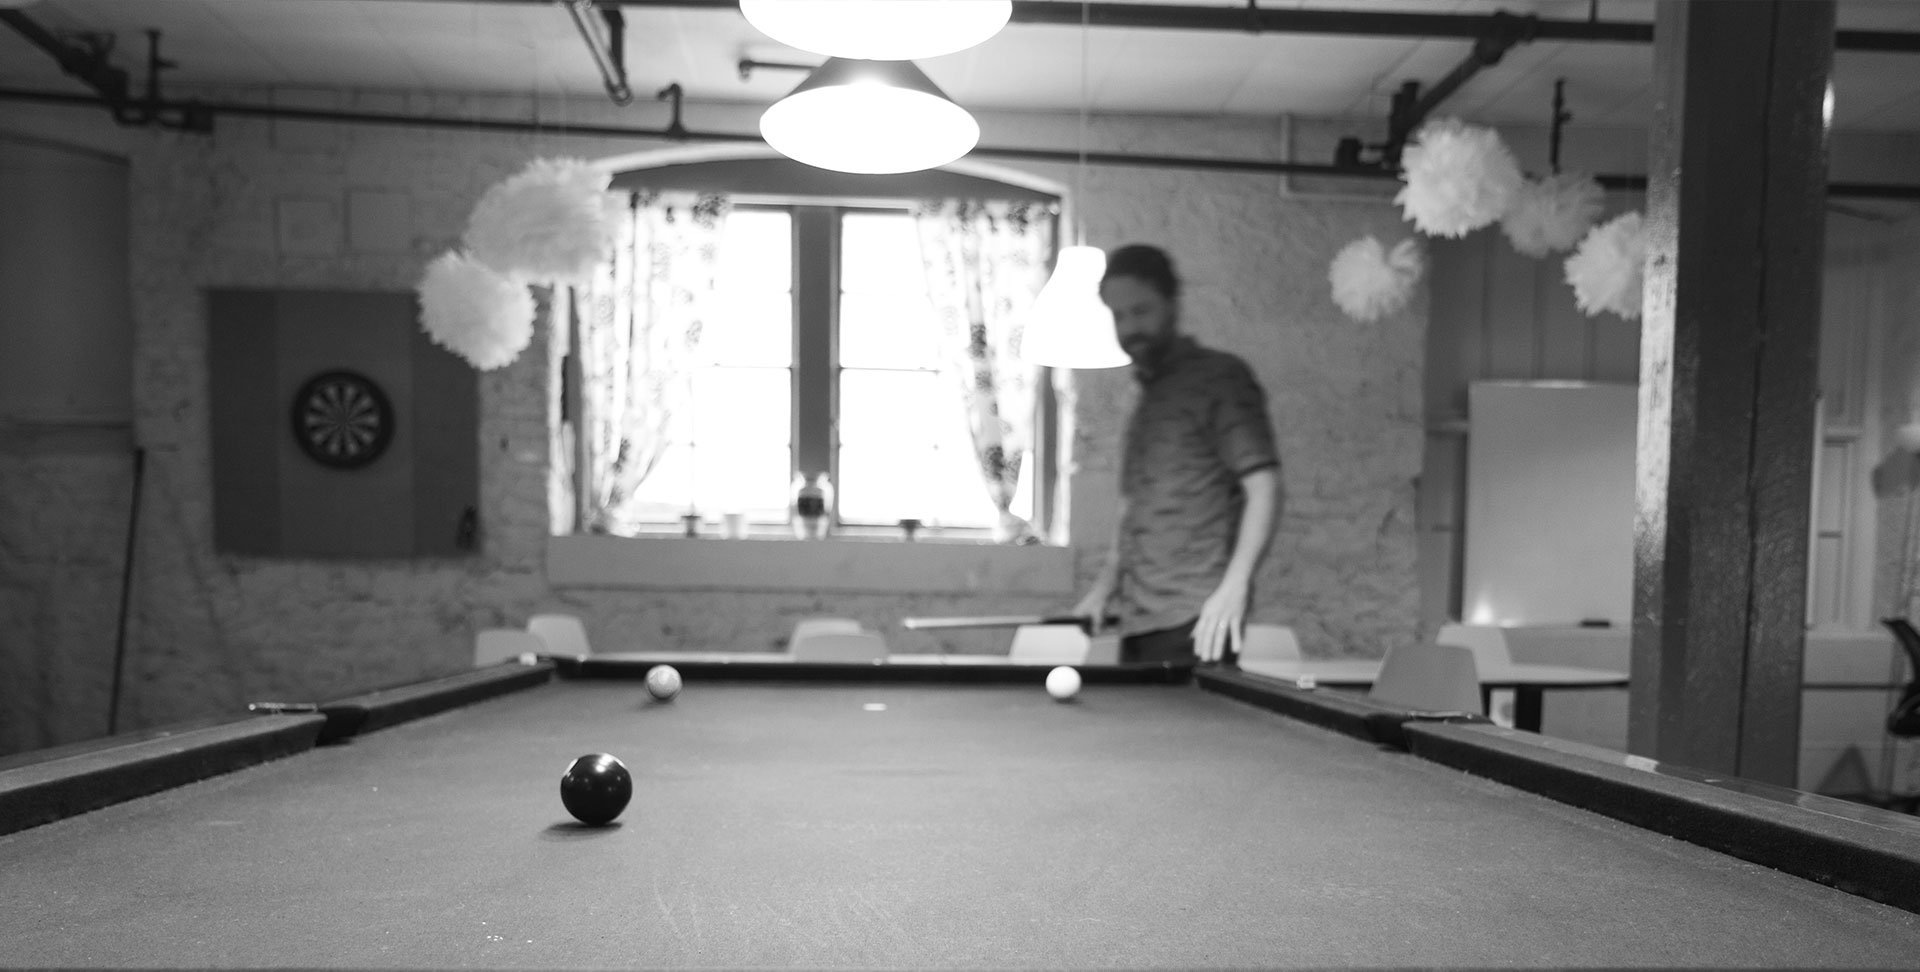 Blue North team member playing billiards